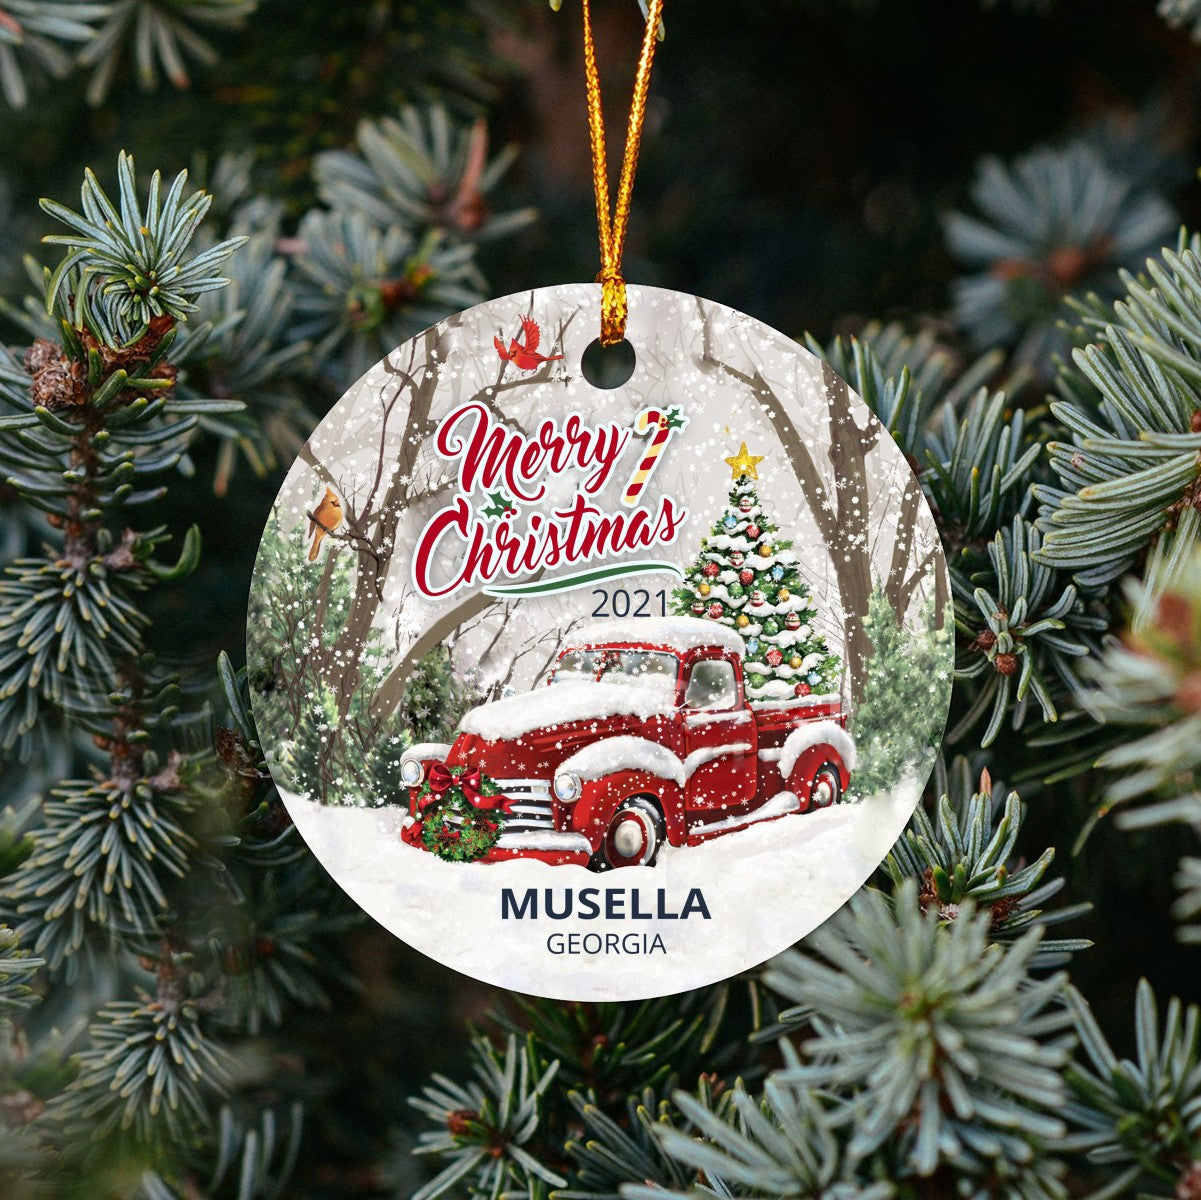 Christmas Tree Ornaments Musella - Ornament With Name City, State Musella Georgia GA Ornament - Red Truck Xmas Ornaments 3'' Plastic Gift For Family, Friend And Housewarming